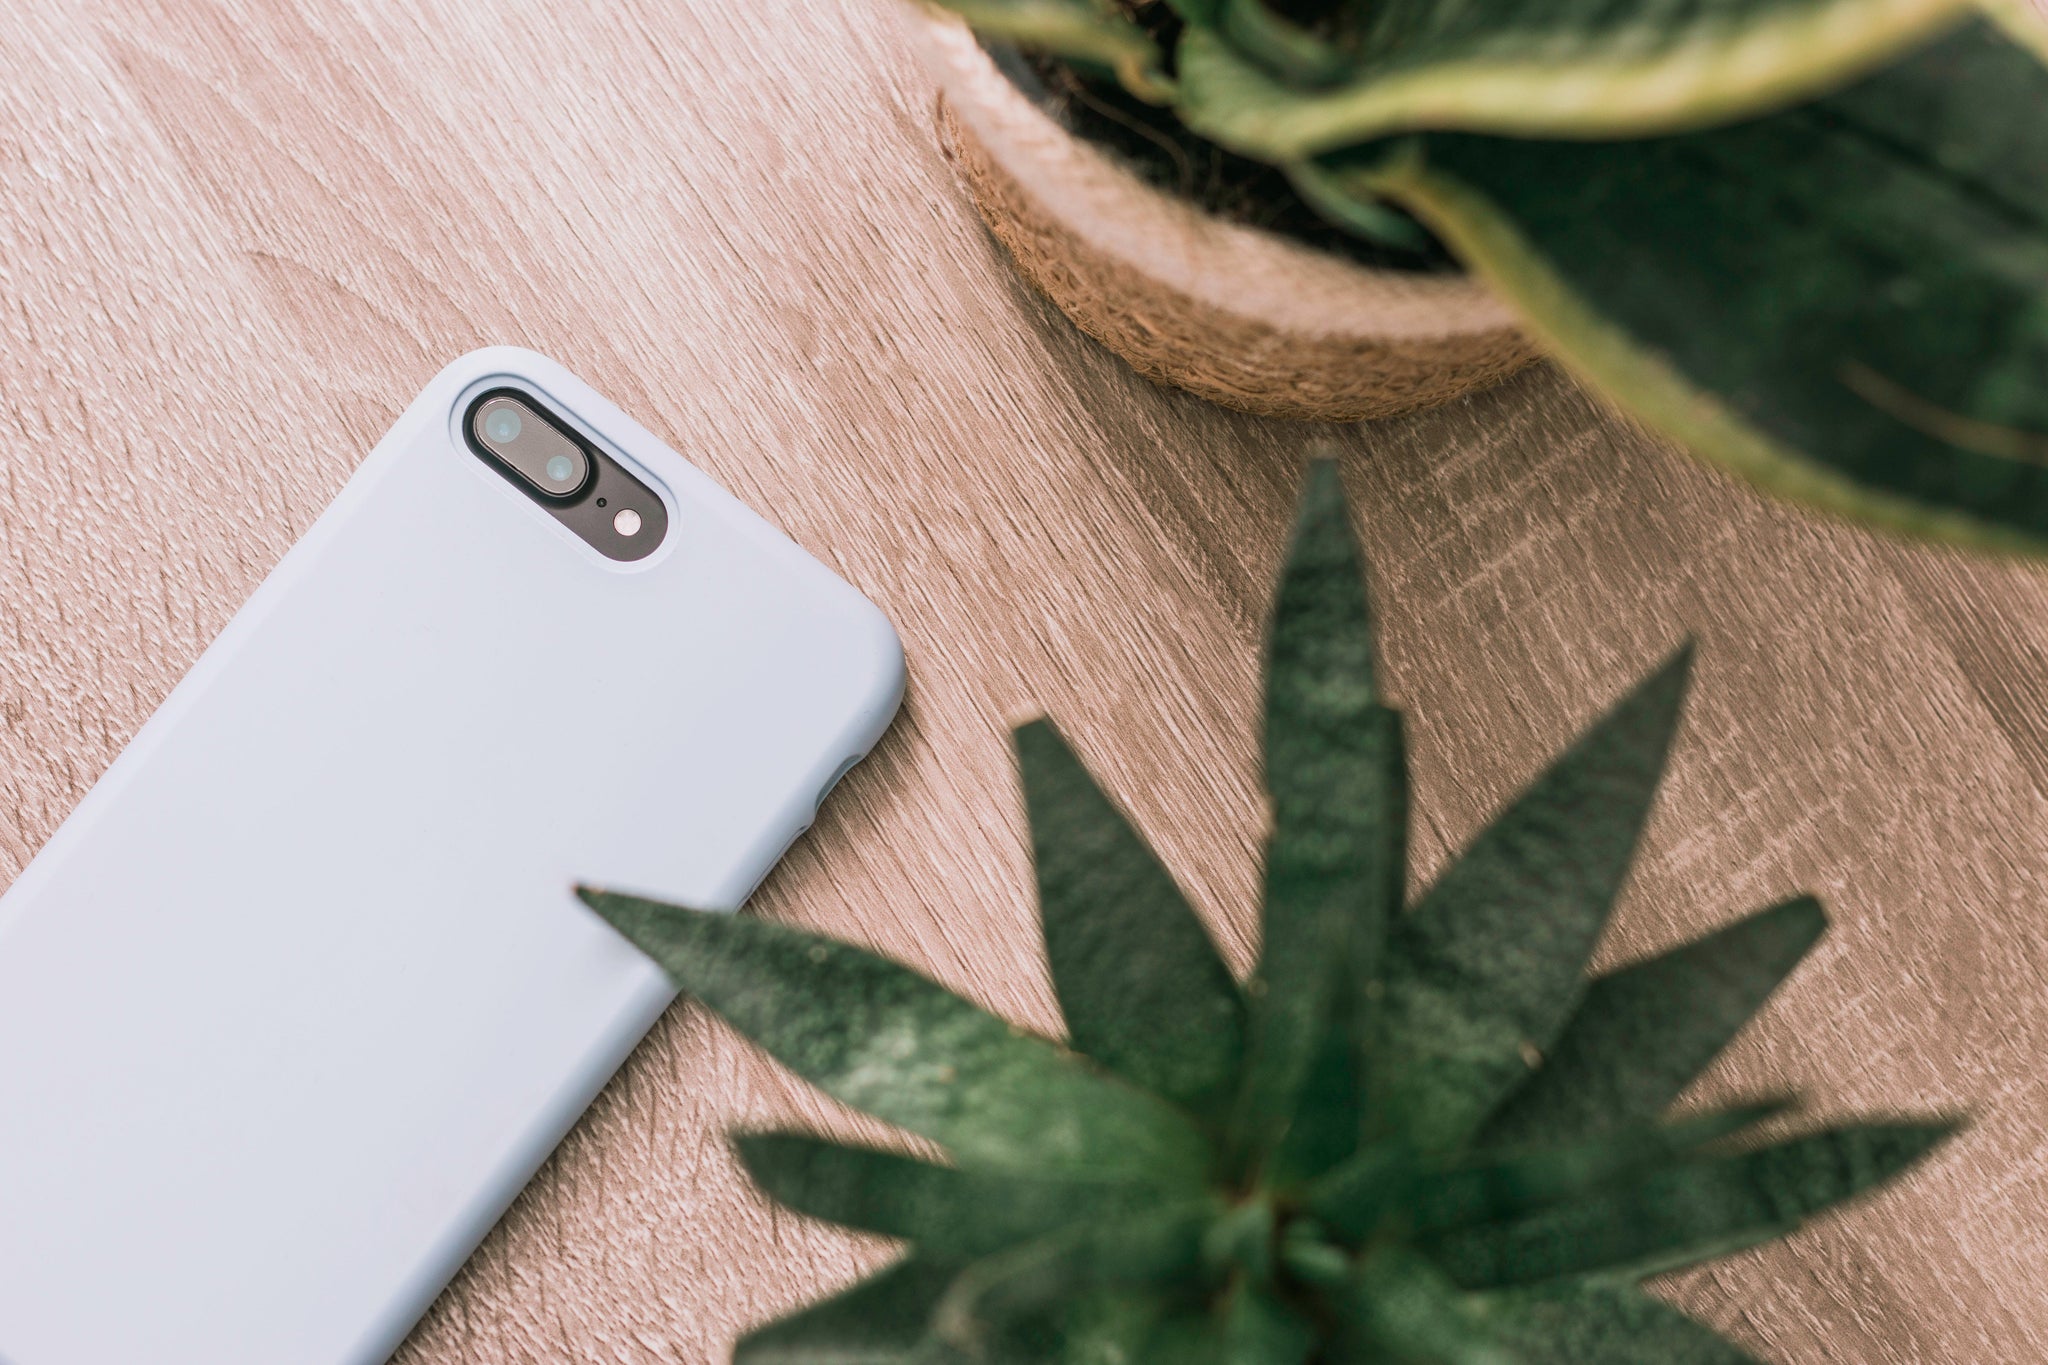 An iPhone with a light blue phone case lying on a wooden table next to two small plants.